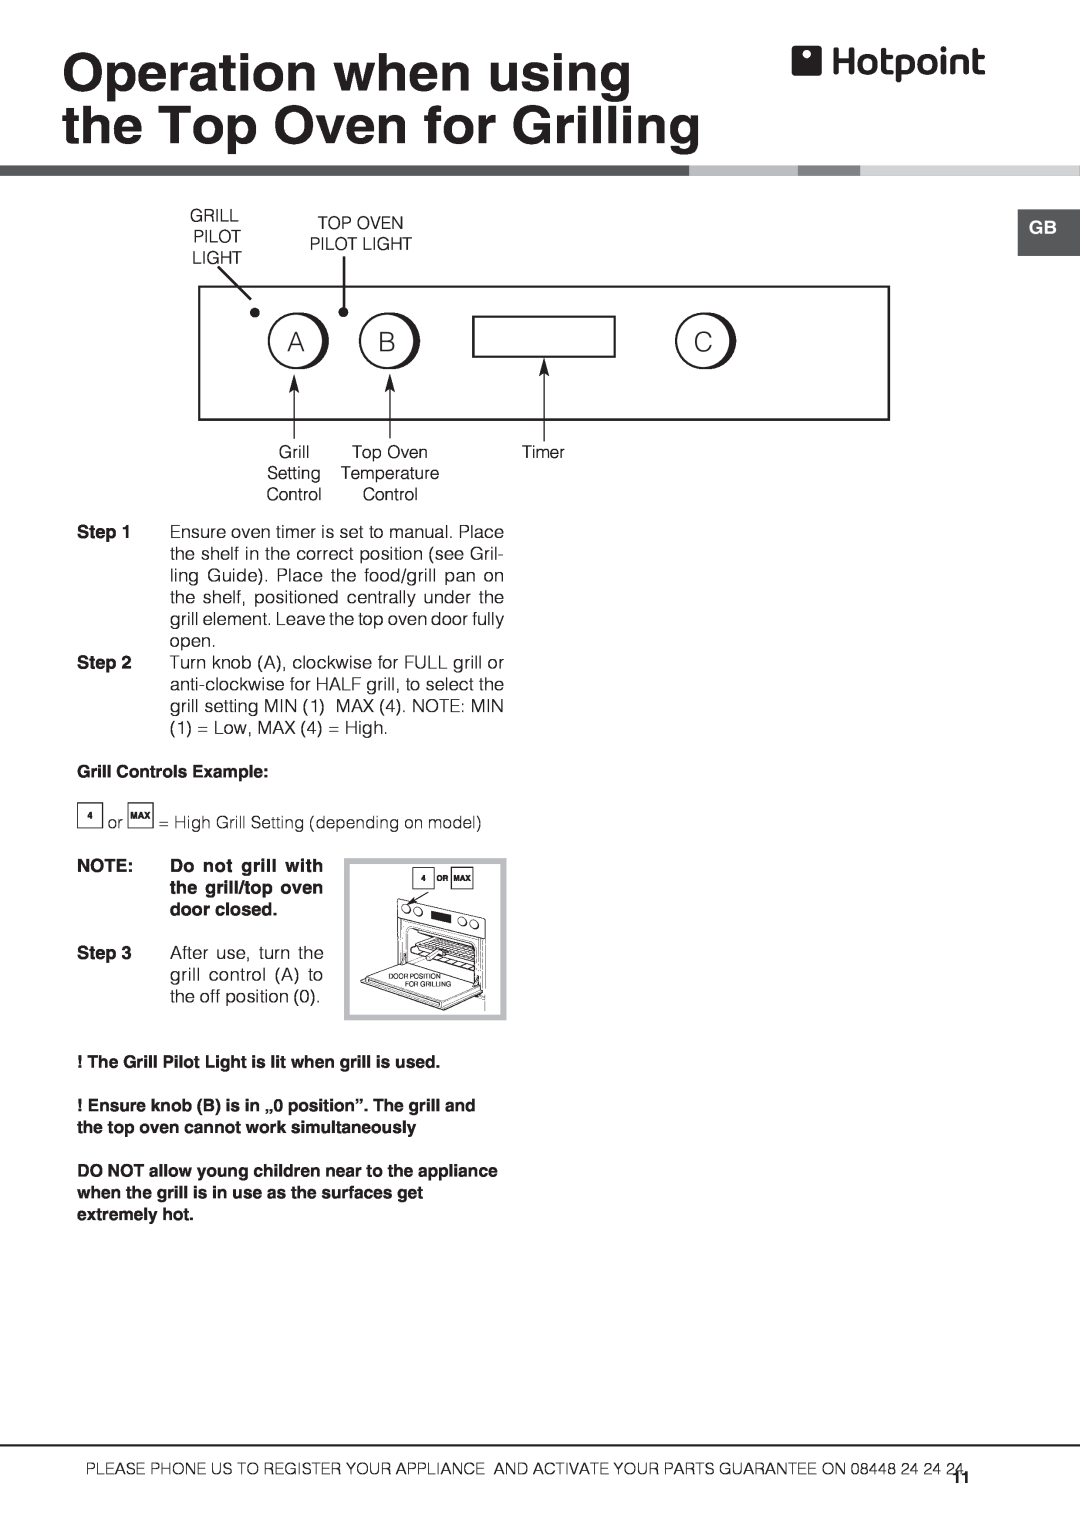 Hotpoint DH53CK 2, DH53X S, DH53W S, DH53K S, DH3B S Operation when using the Top Oven for Grilling, Grill Controls Example 